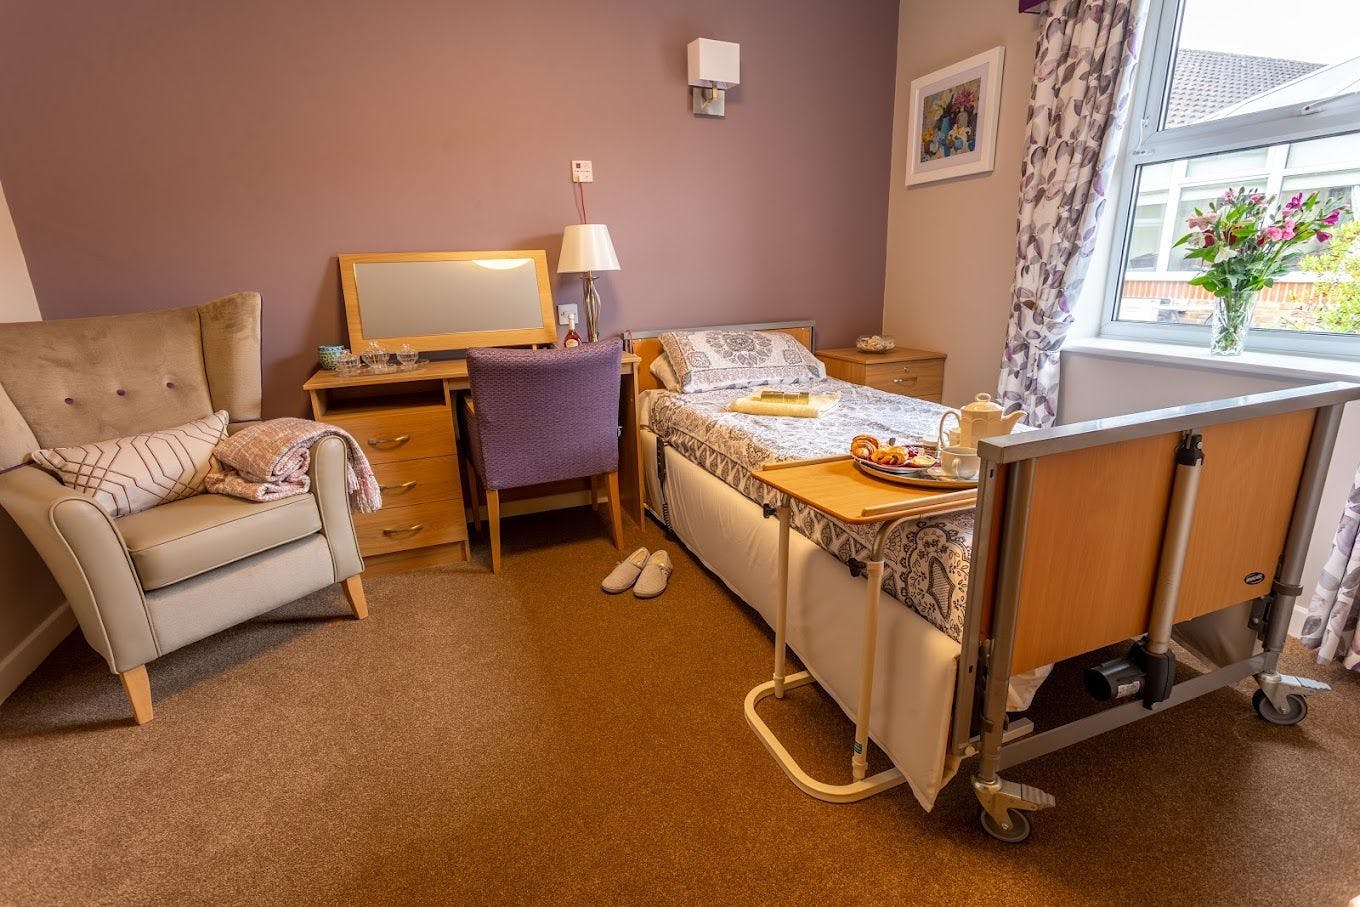 Bedroom at Monread Lodge Care Home in Hertfordshire, East of England